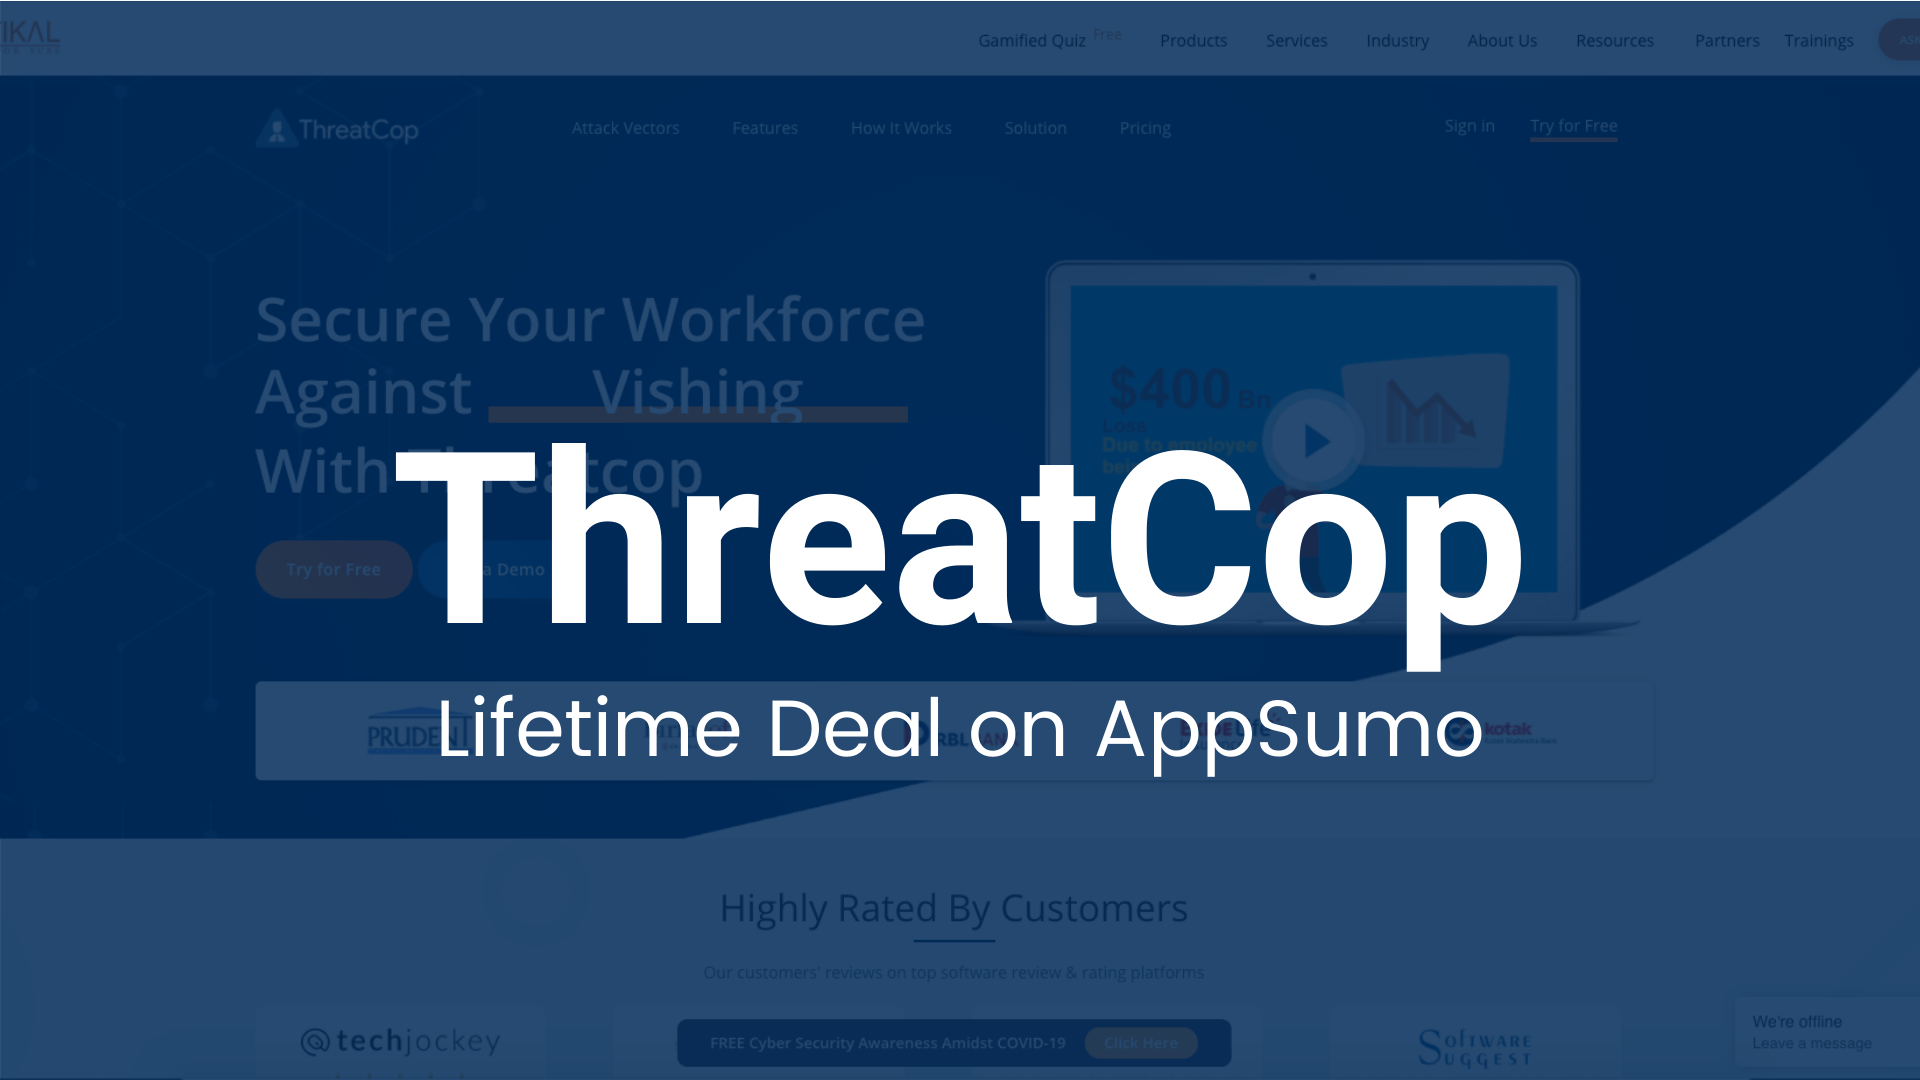 ThreatCop: Best Security Practices With Simulated Attacks